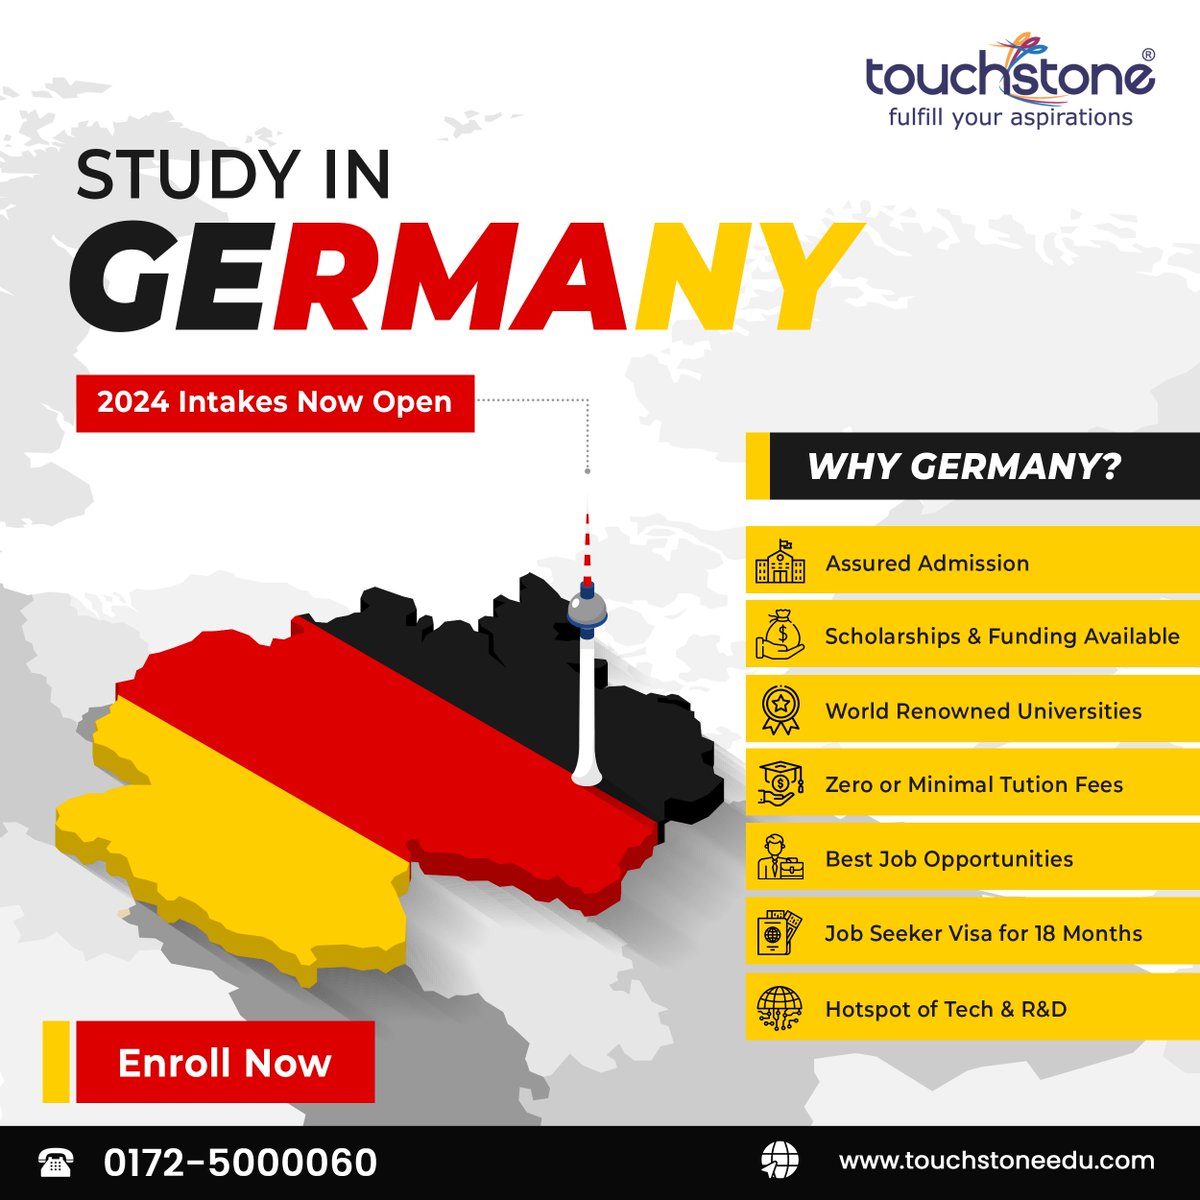 Dream of being a global citizen with top education? 🎓✈️ Germany calls! With Touchstone Educationals, your study journey in Germany is seamless and exciting. 🏰📚 Explore historic universities and cutting-edge research with us. 
#StudyinGermany #germanyintake #scholarships